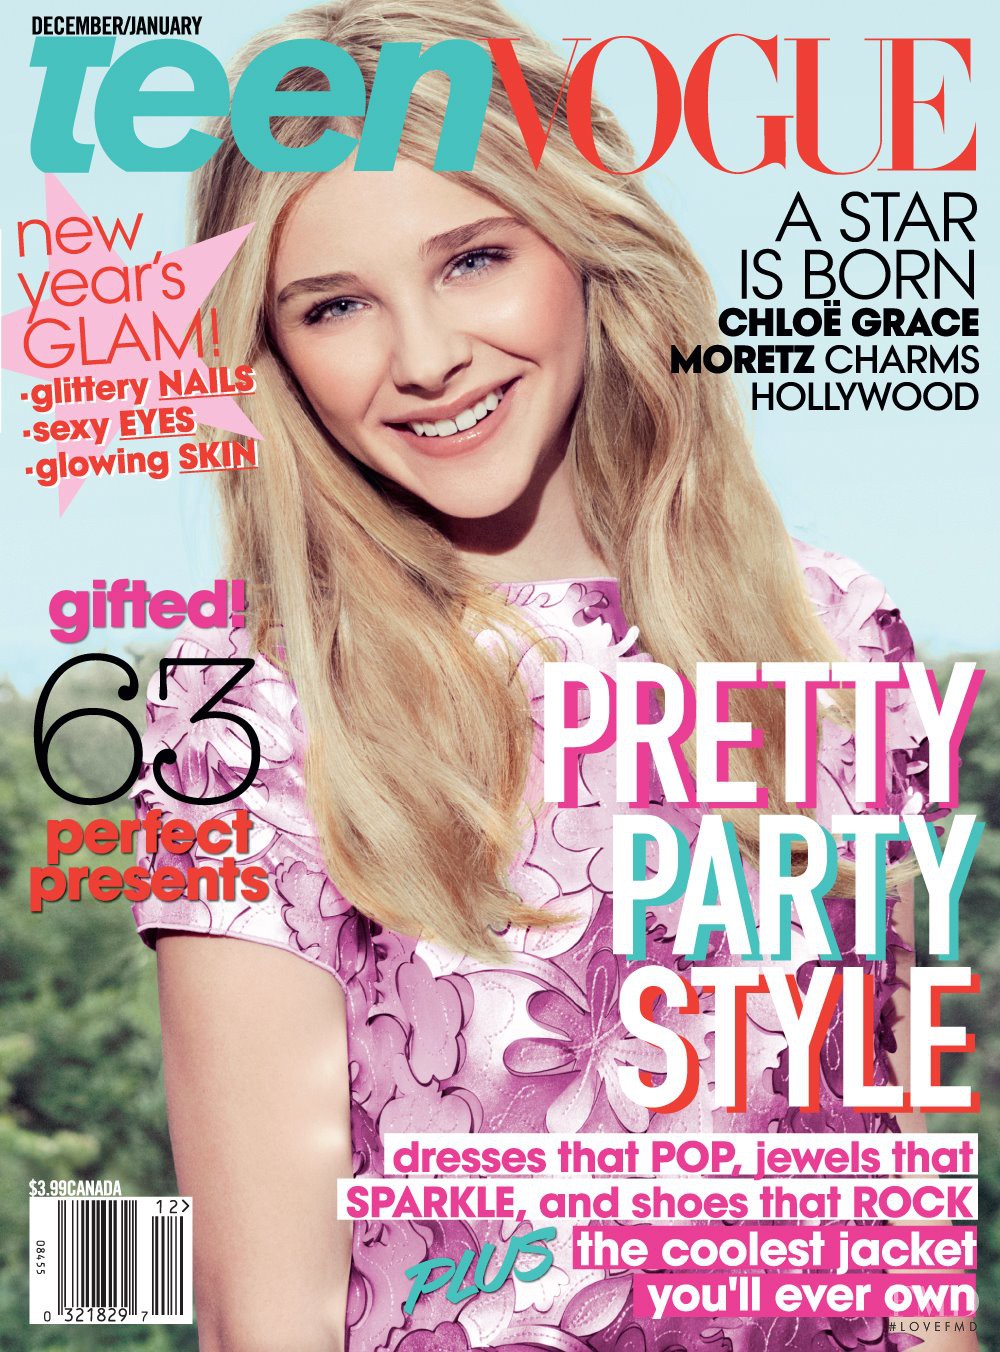 Cover of Teen Vogue USA with Chloë Moretz, December 2011 (ID:9772 ...